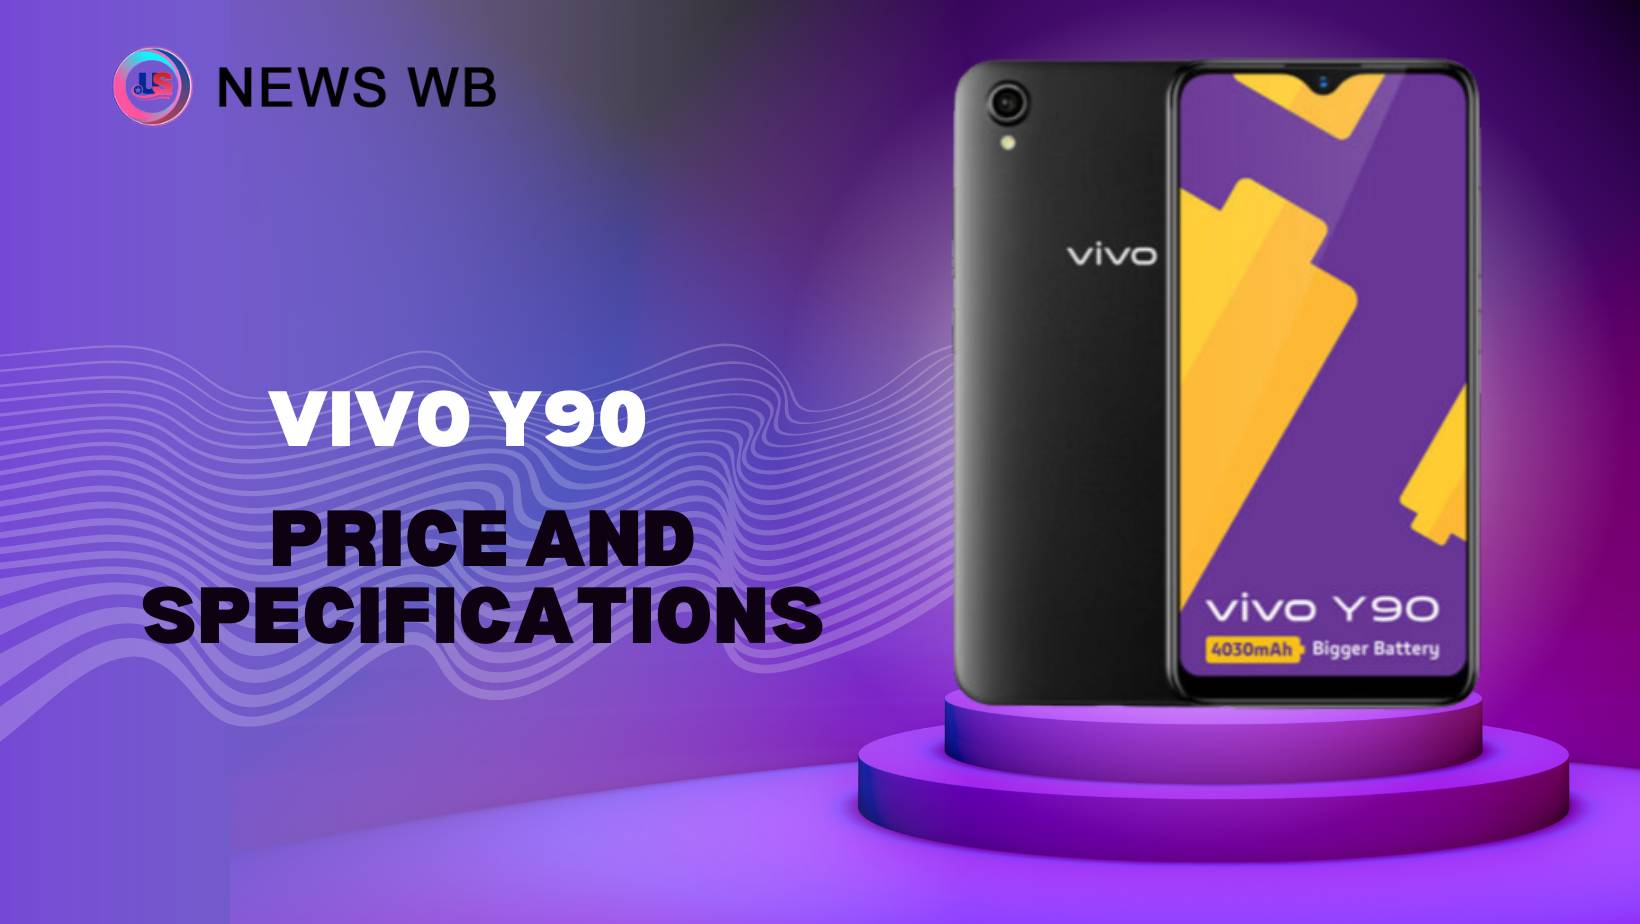 Vivo Y90 Price and Specifications